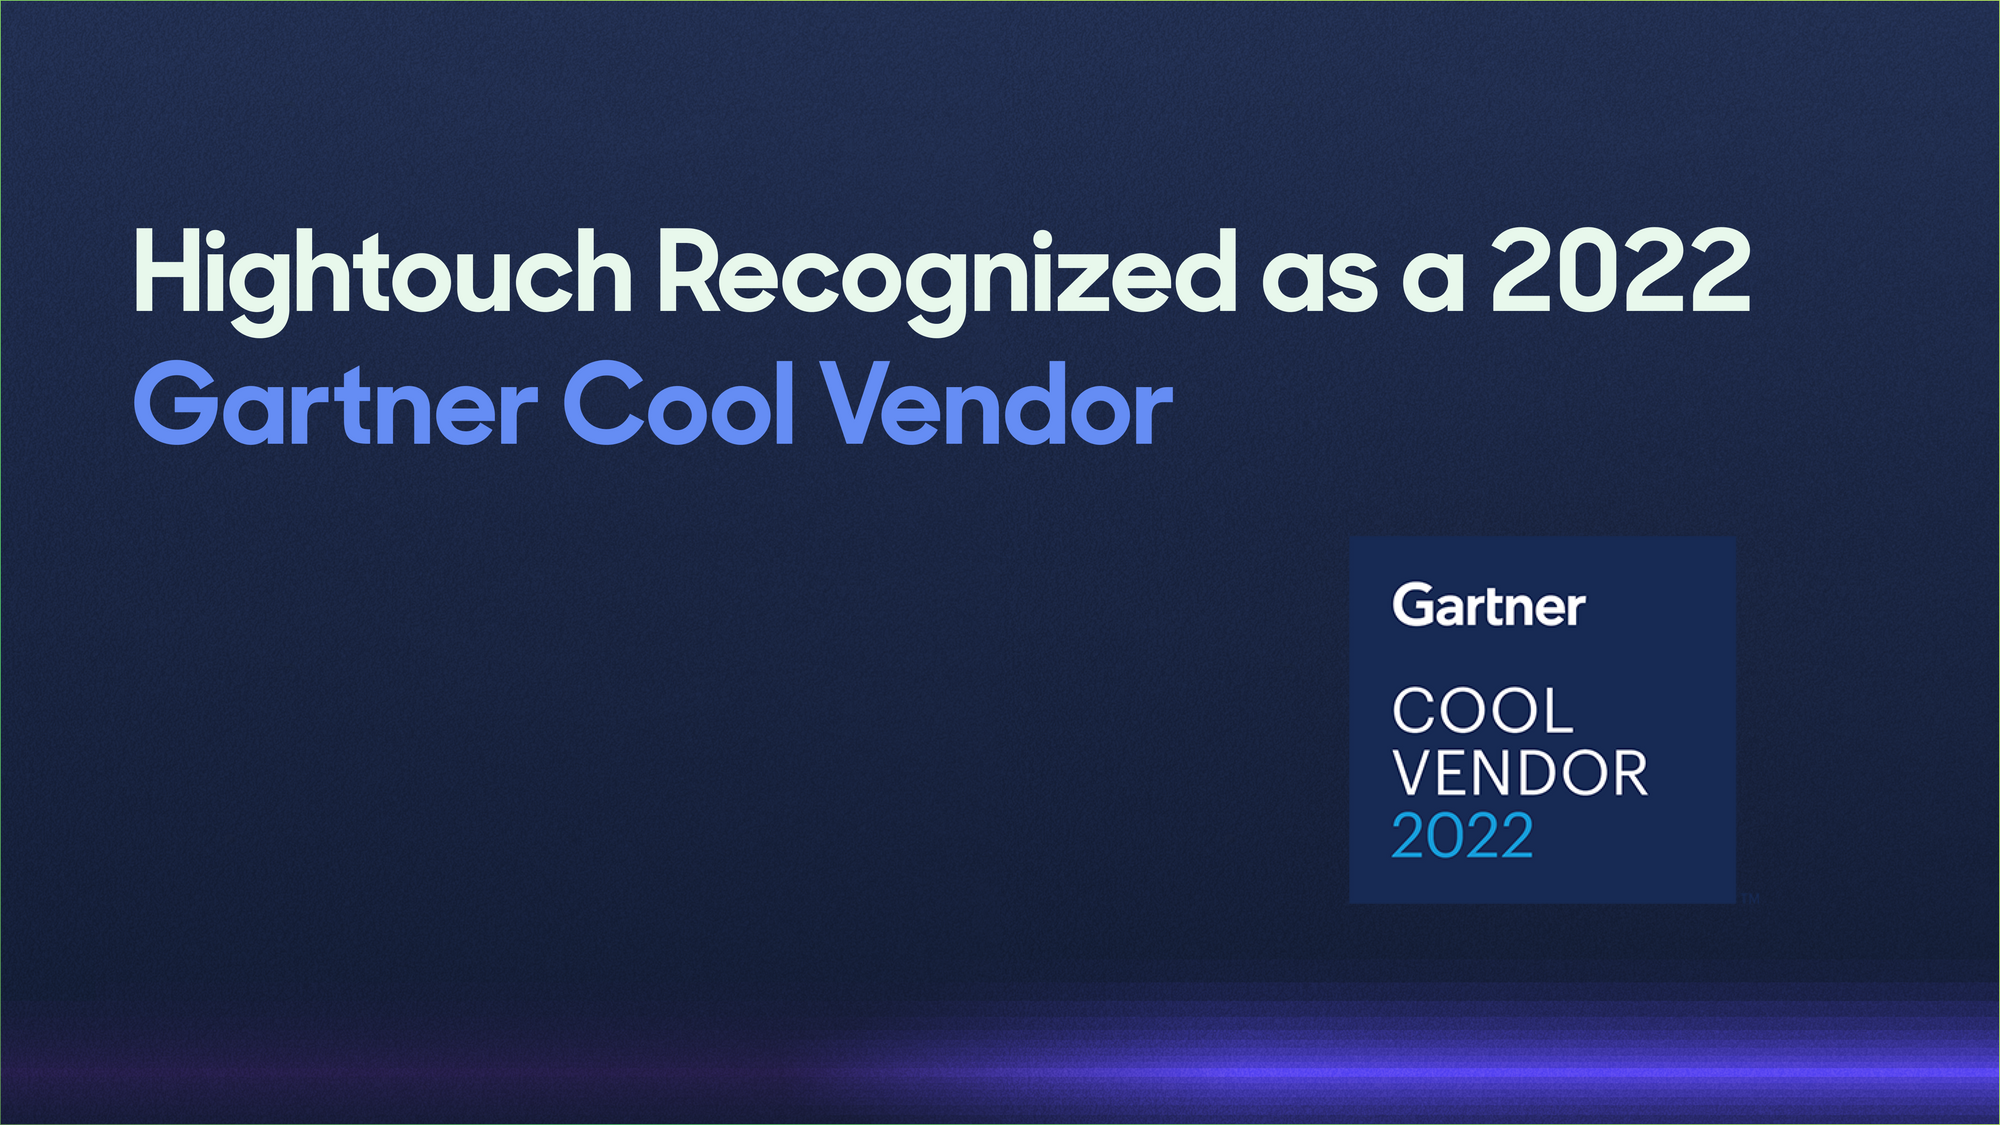 Hightouch recognized as Gartner Cool Vendor in Marketing Data and Analytics.